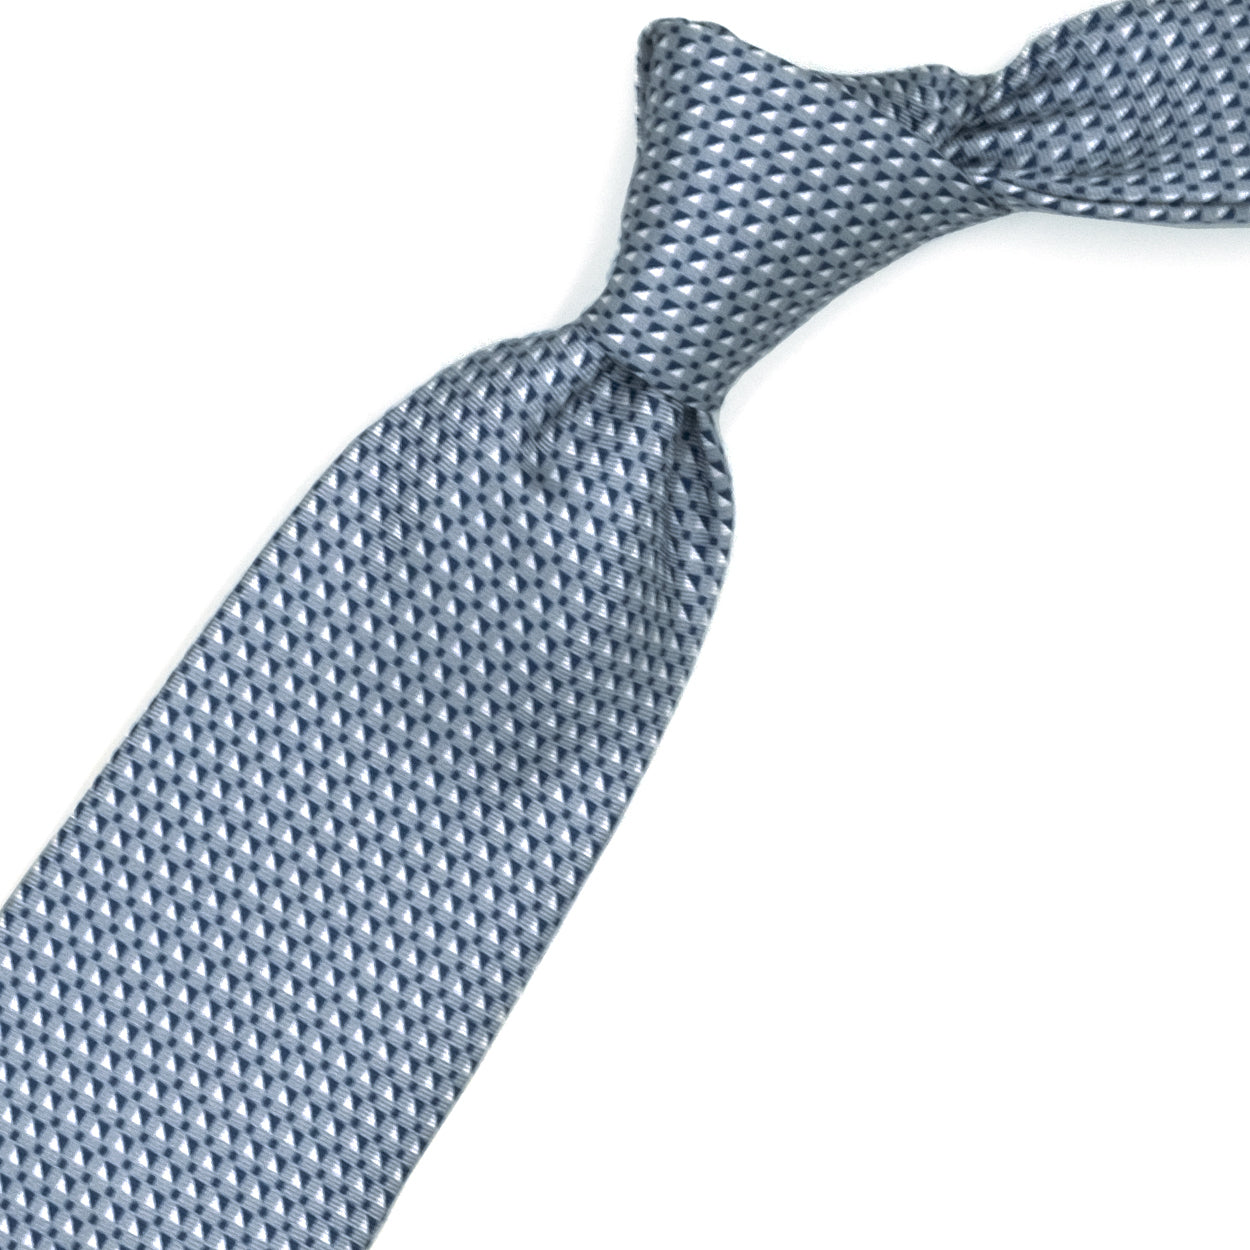 Grey tie with blue and white geometric pattern